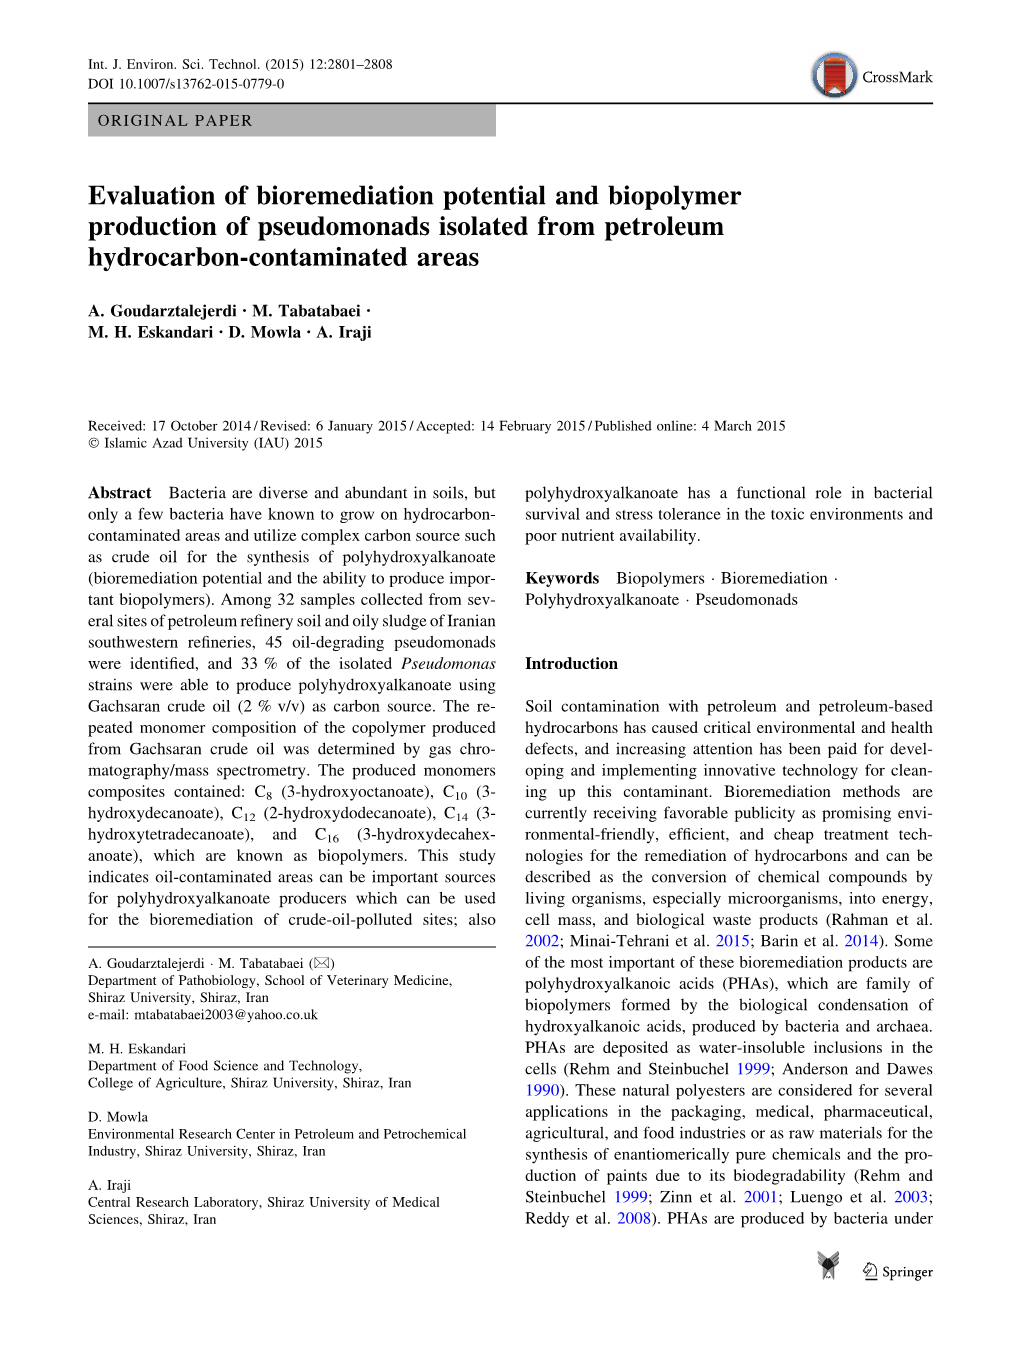 Evaluation of Bioremediation Potential and Biopolymer Production of Pseudomonads Isolated from Petroleum Hydrocarbon-Contaminated Areas